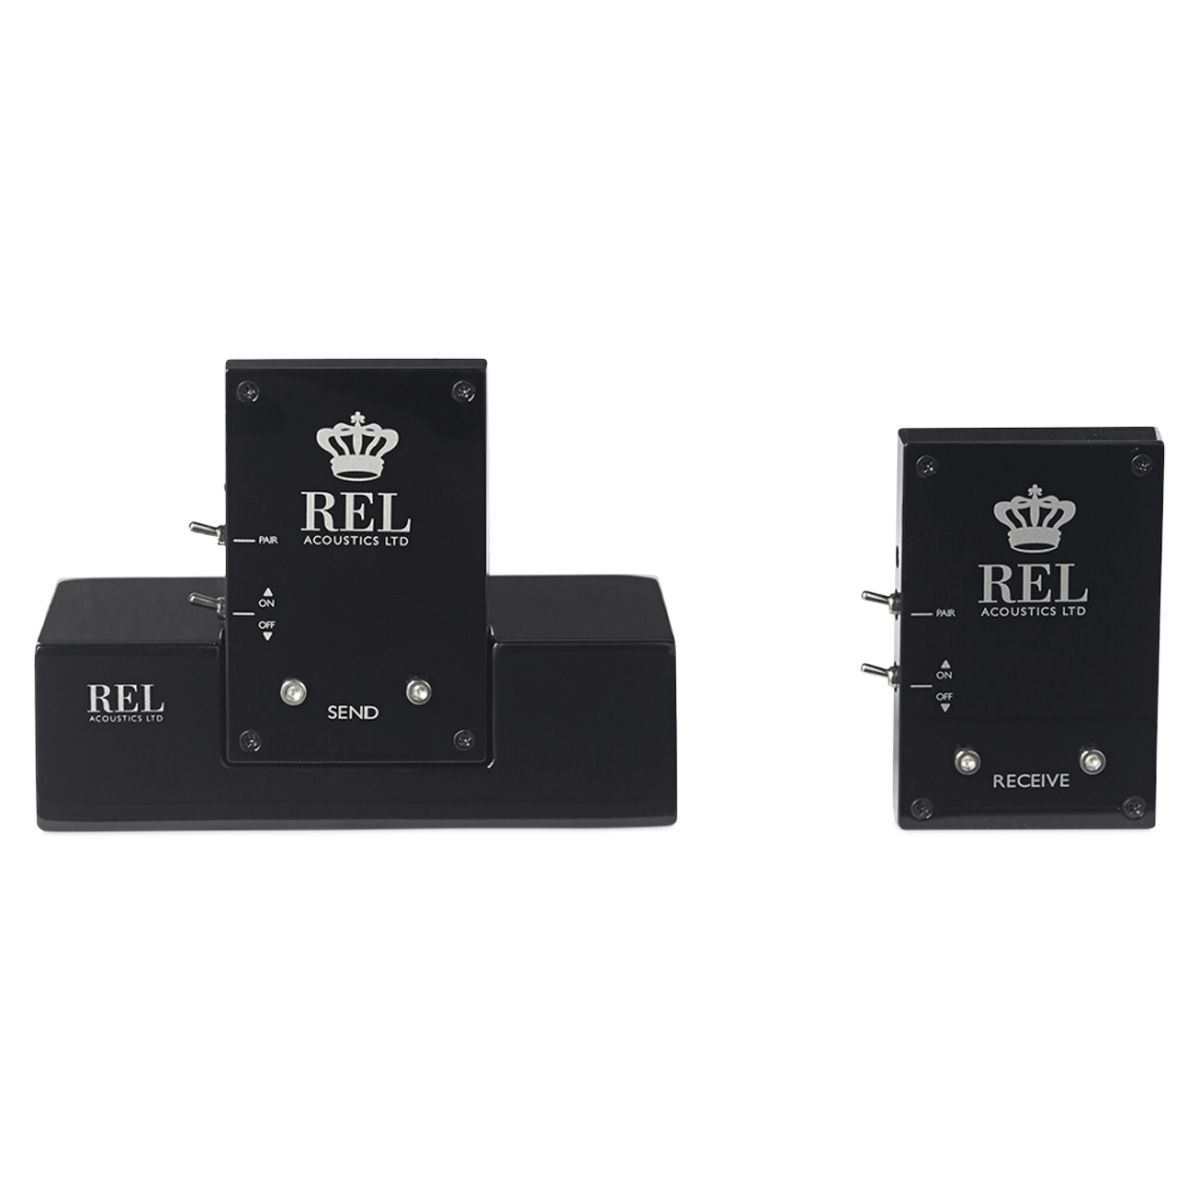 REL Acoustics Arrow Wireless Transmitter / Receiver - front view of transmitter and receiver